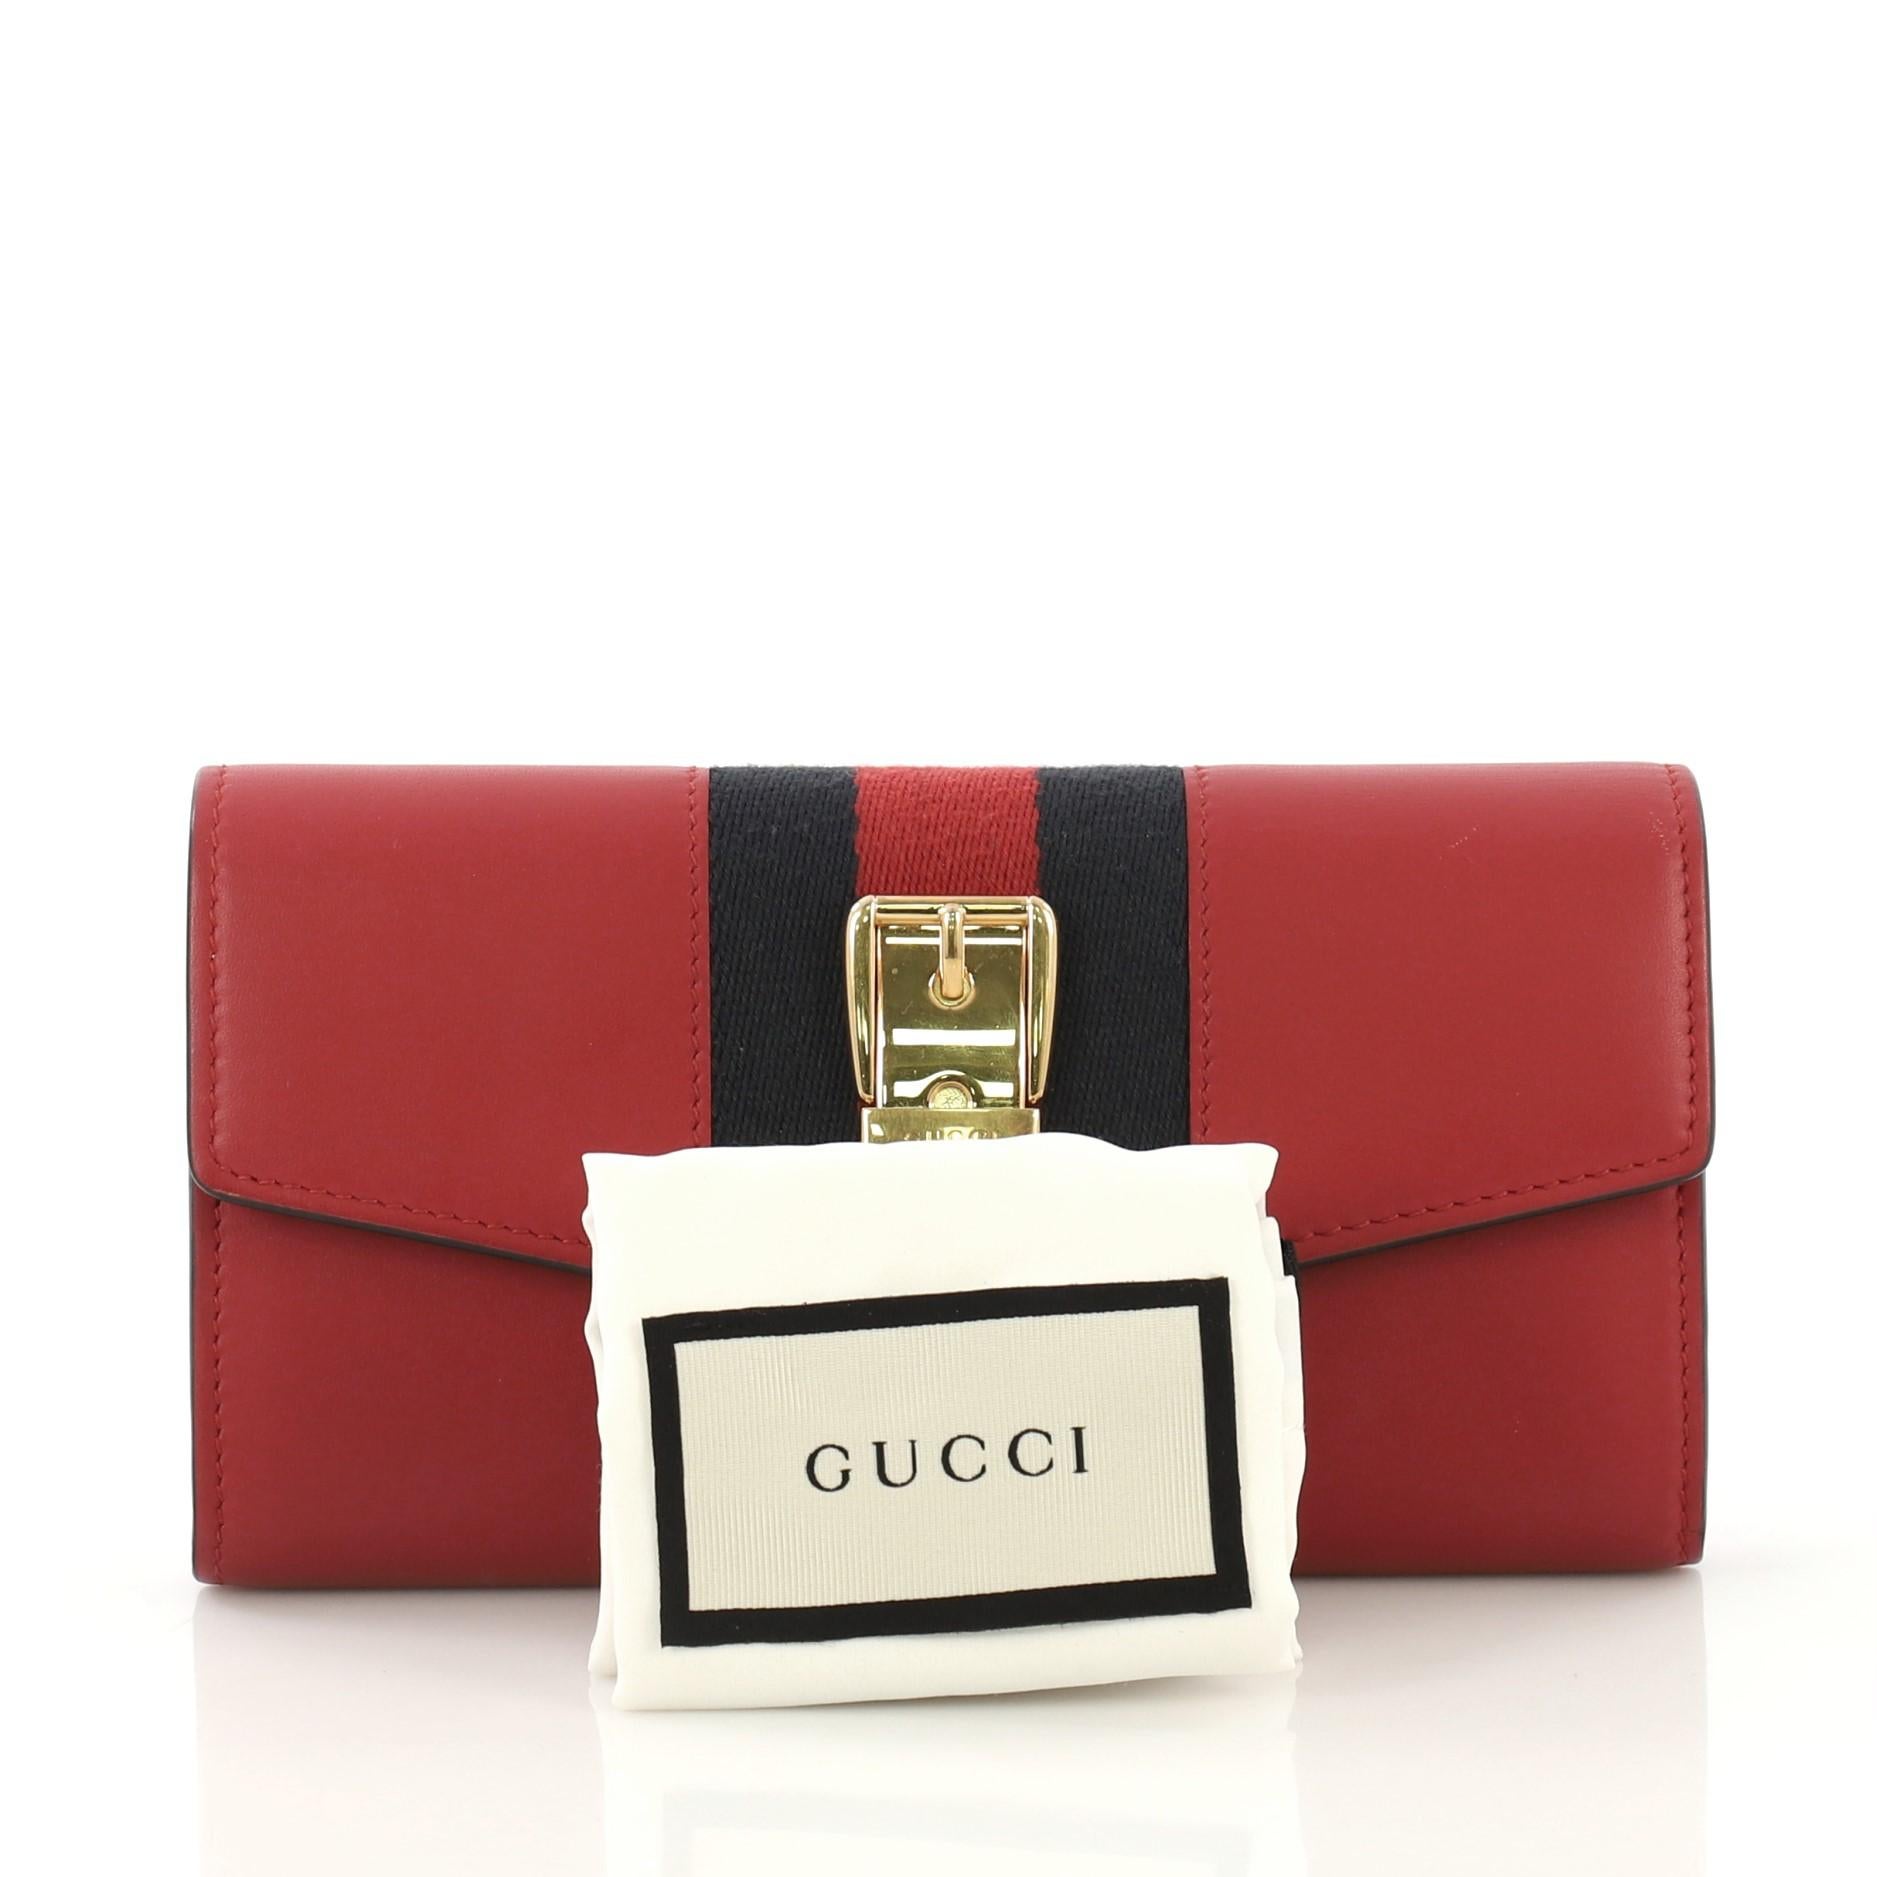 This Gucci Sylvie Continental Wallet Leather, crafted from red leather, features a nylon web detail with buckle accents and gold-tone hardware. It opens to a red leather and black fabric interior with multiple card slots and center zip compartment.